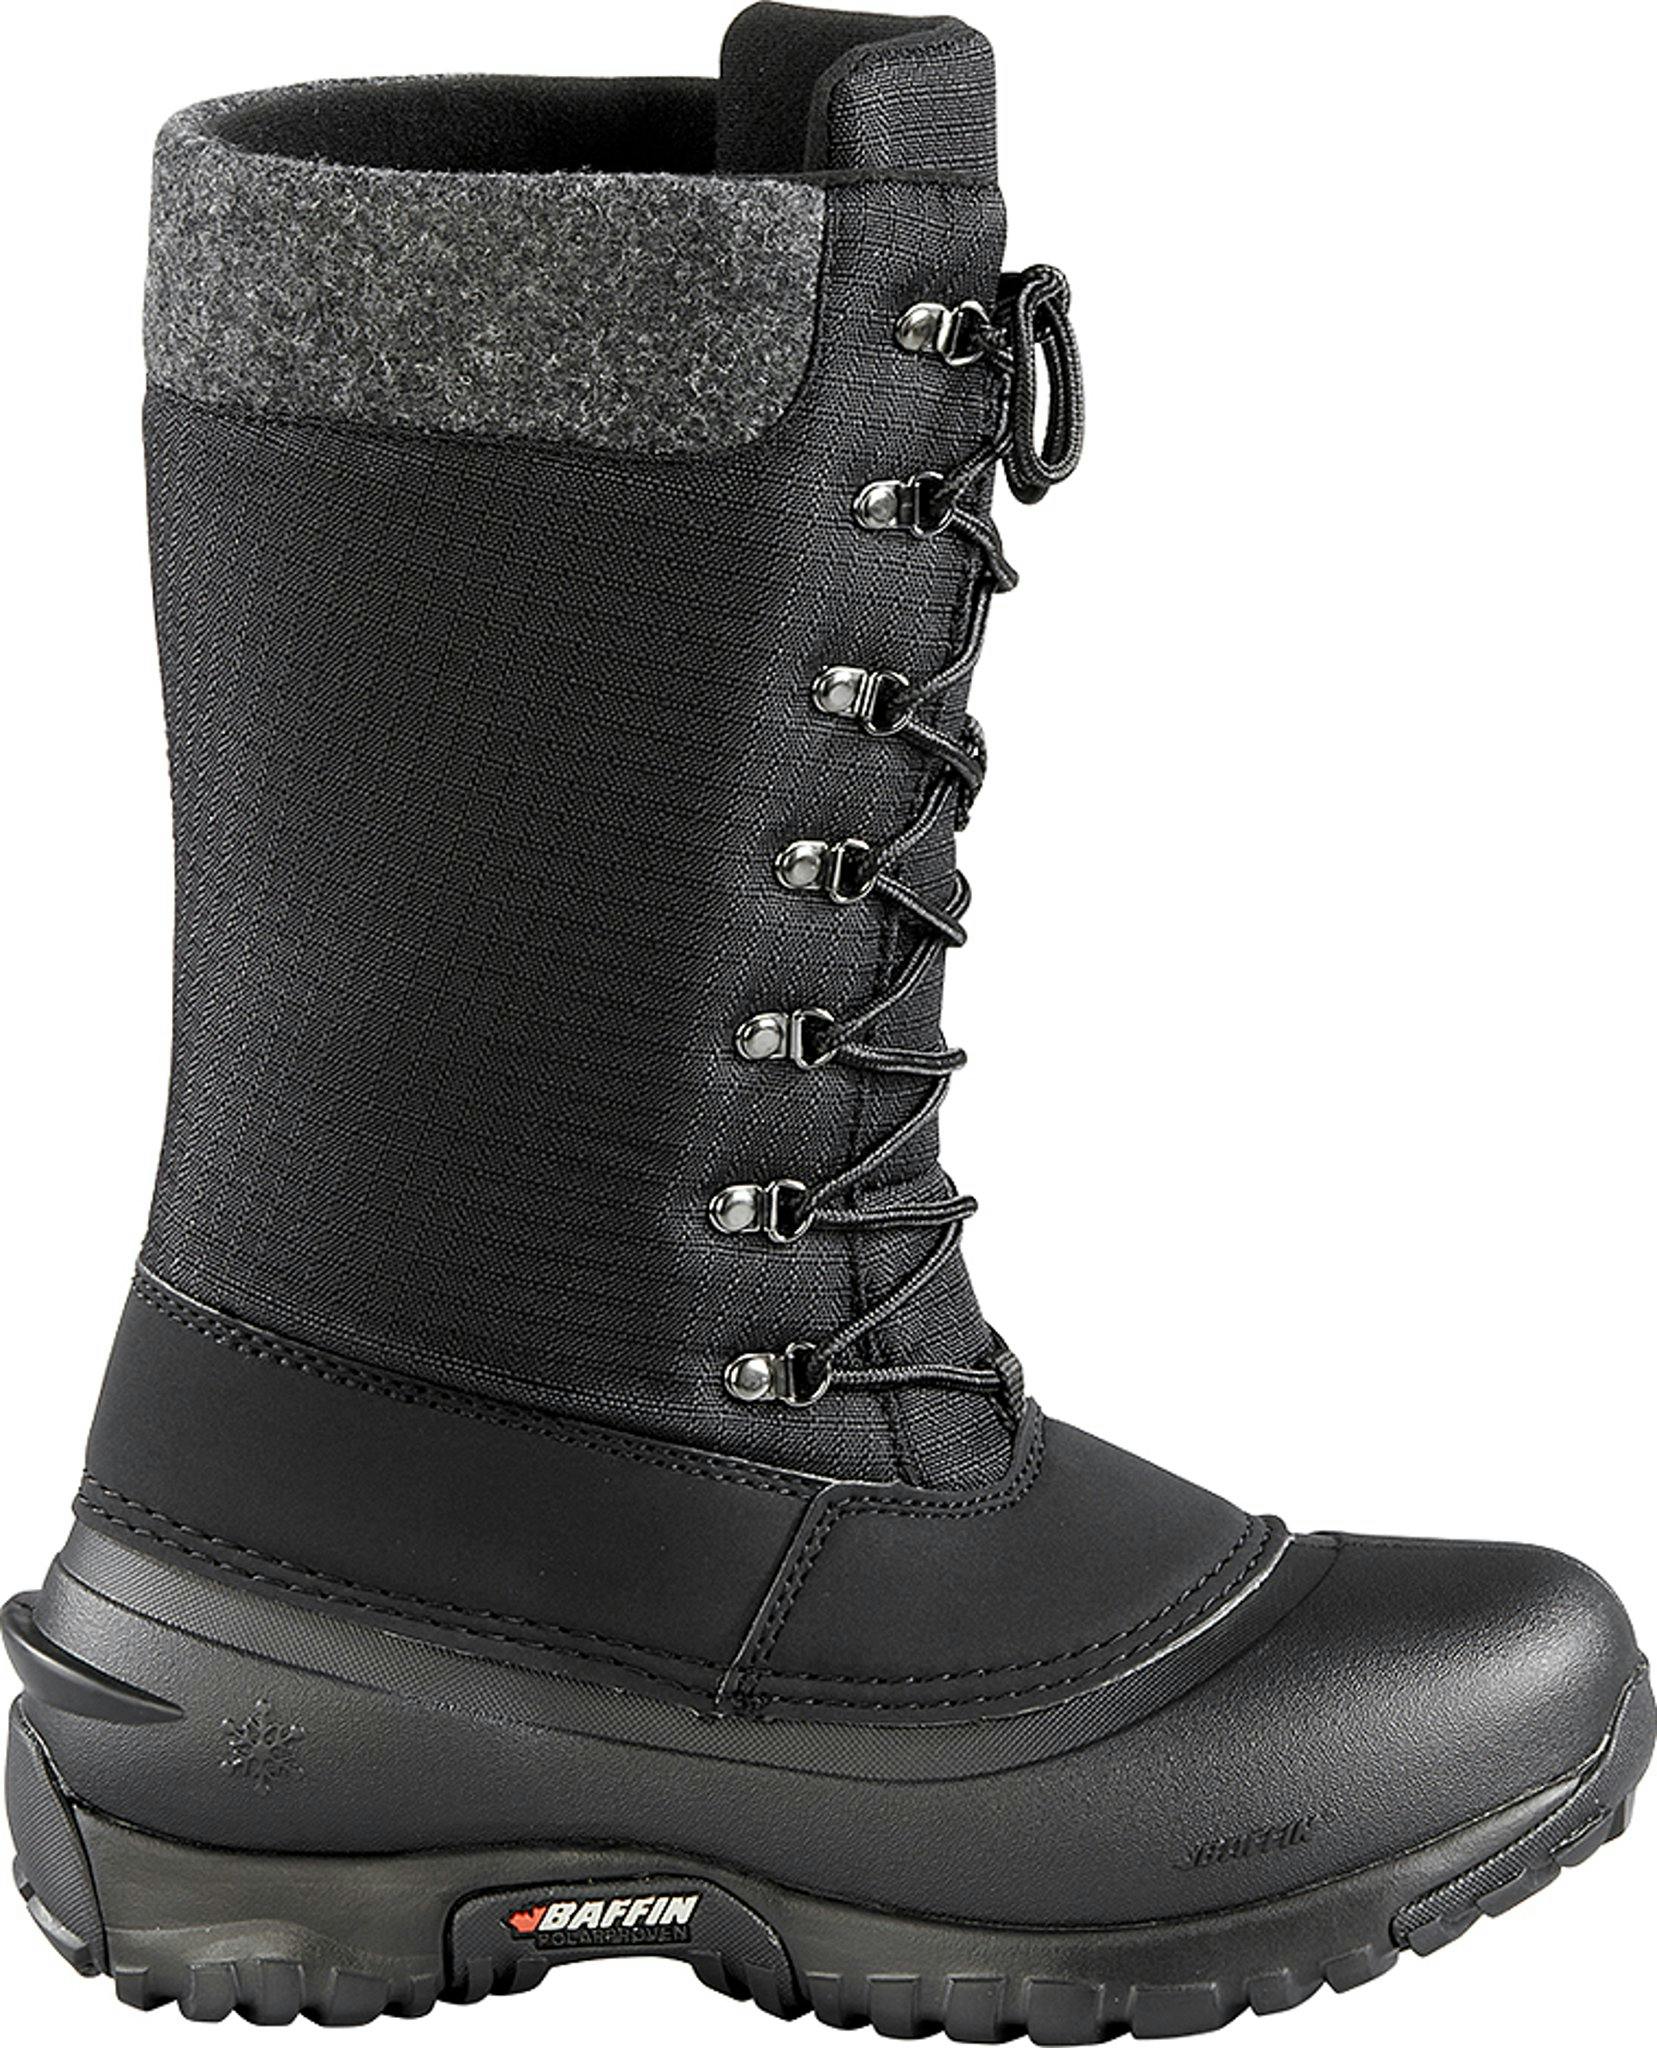 Product image for Jess Boots - Women's